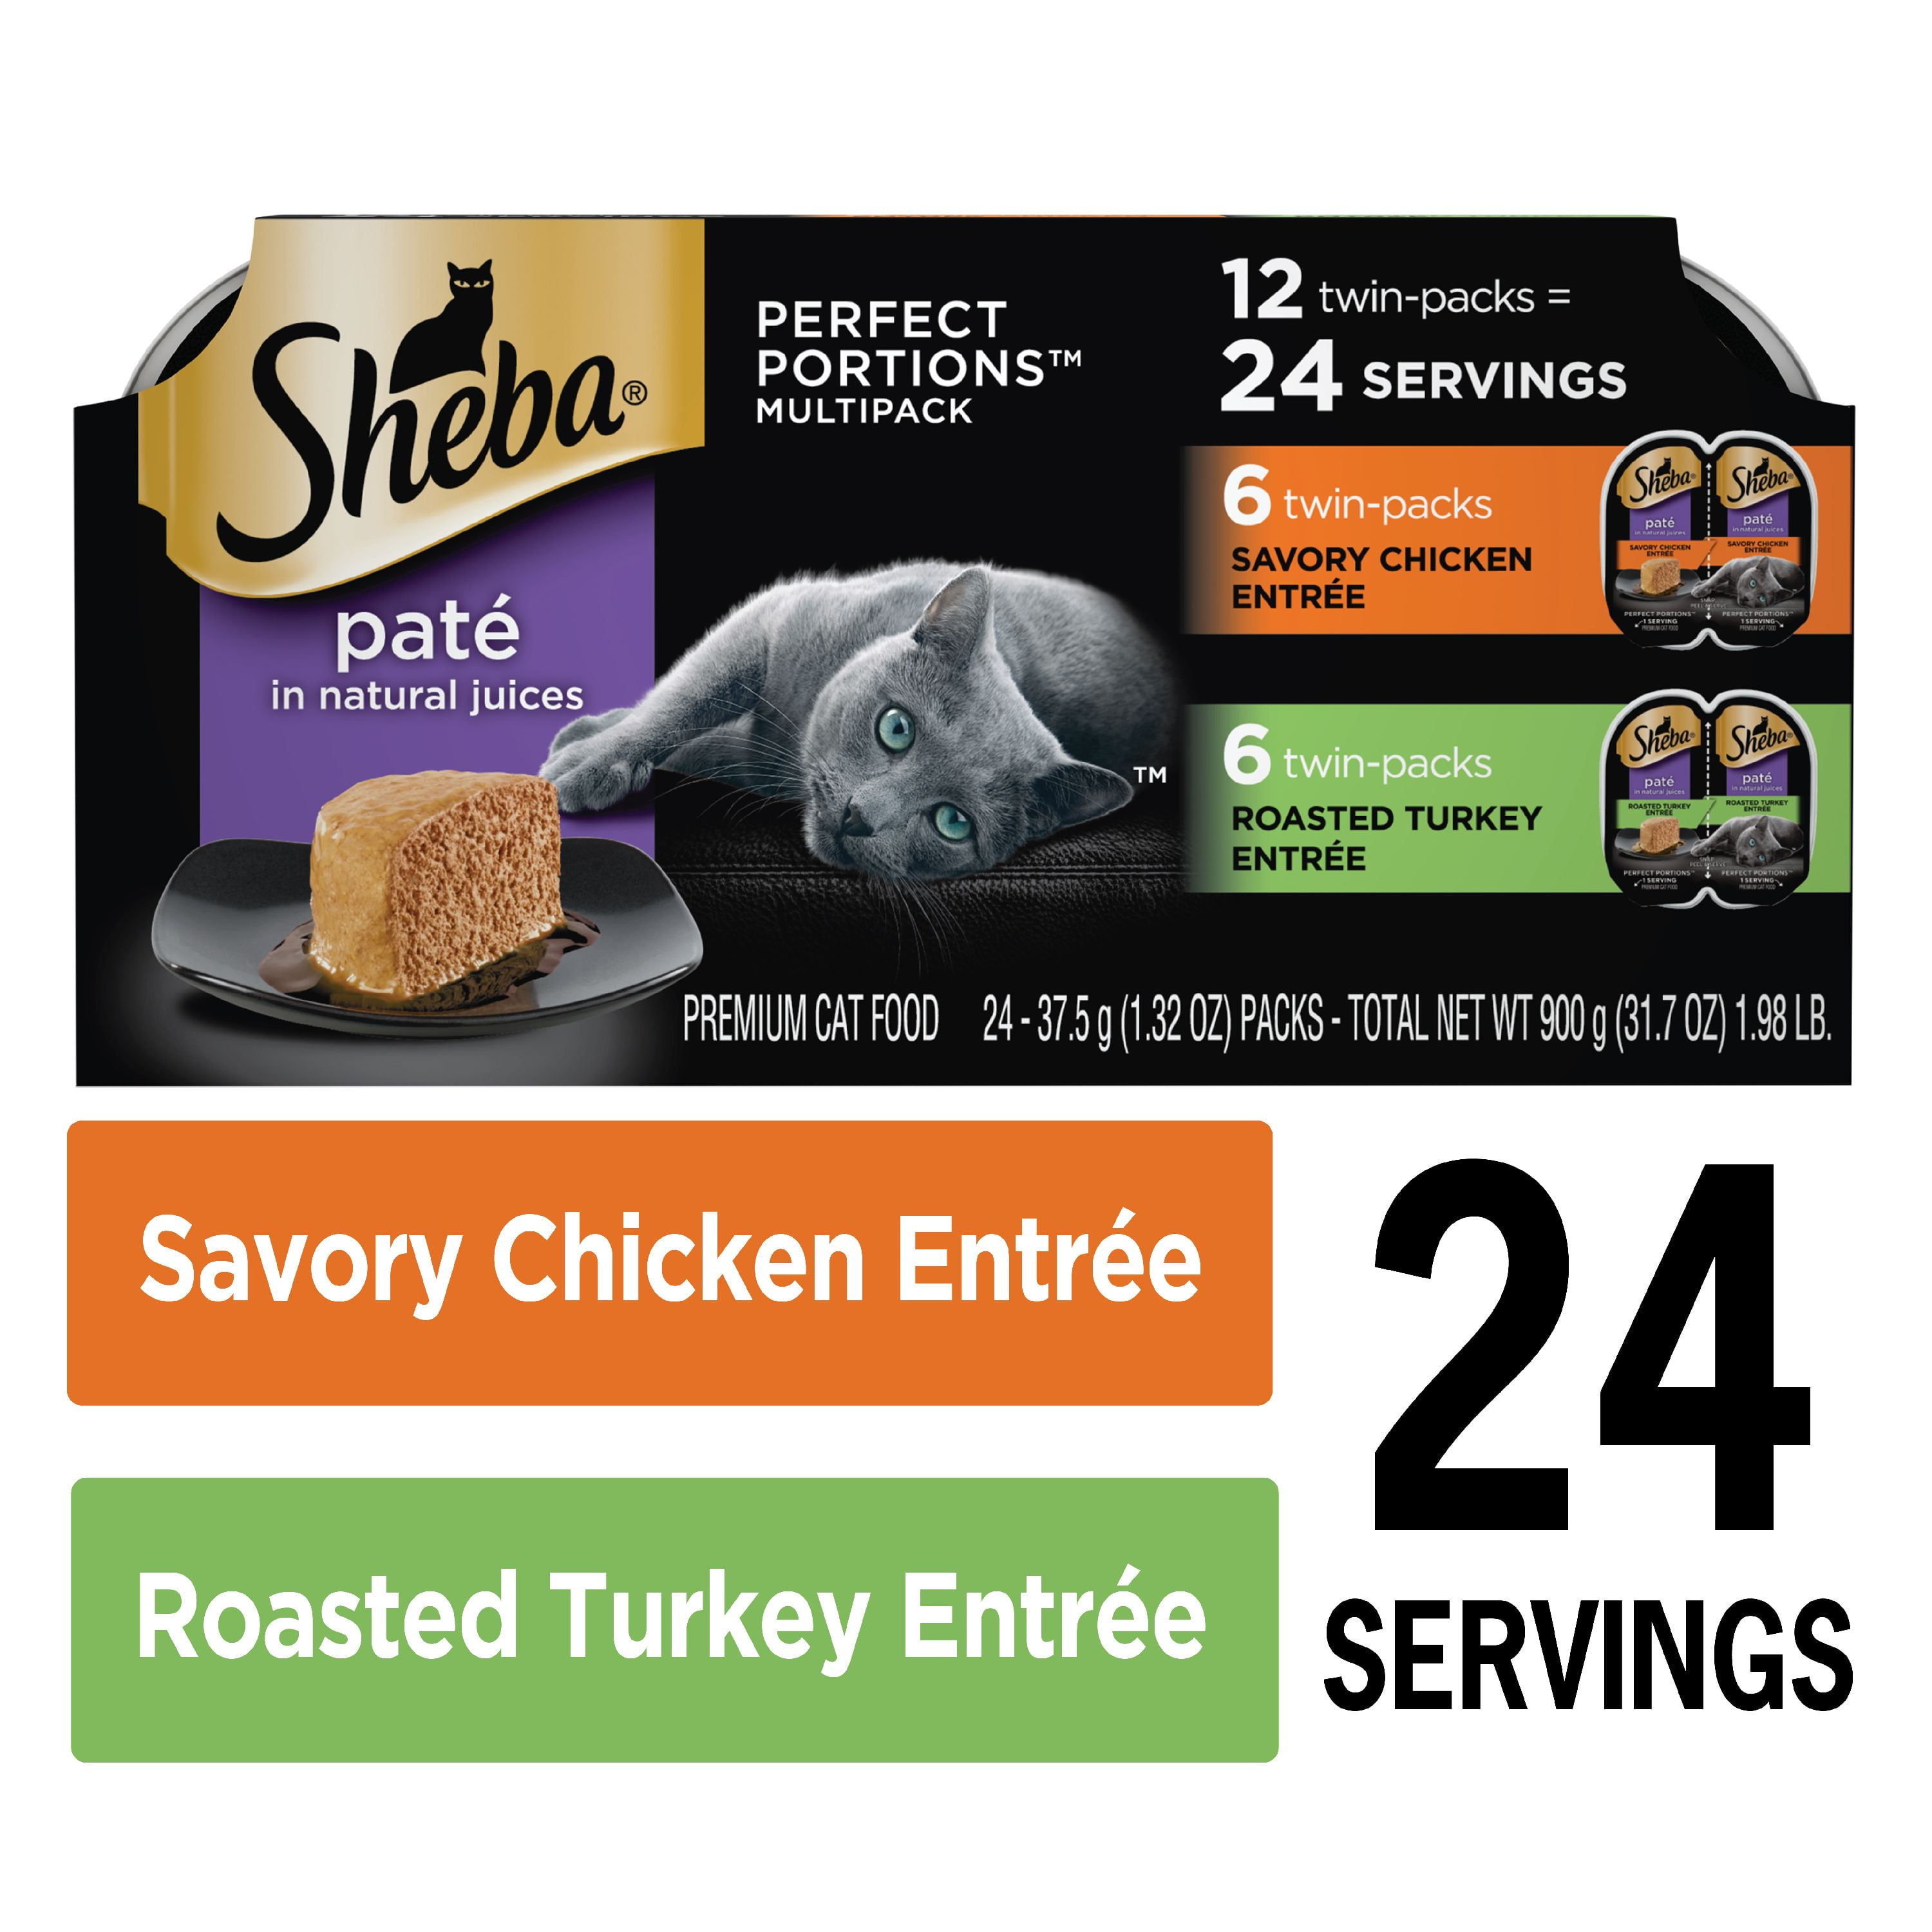 sheba perfect portions 48 pack